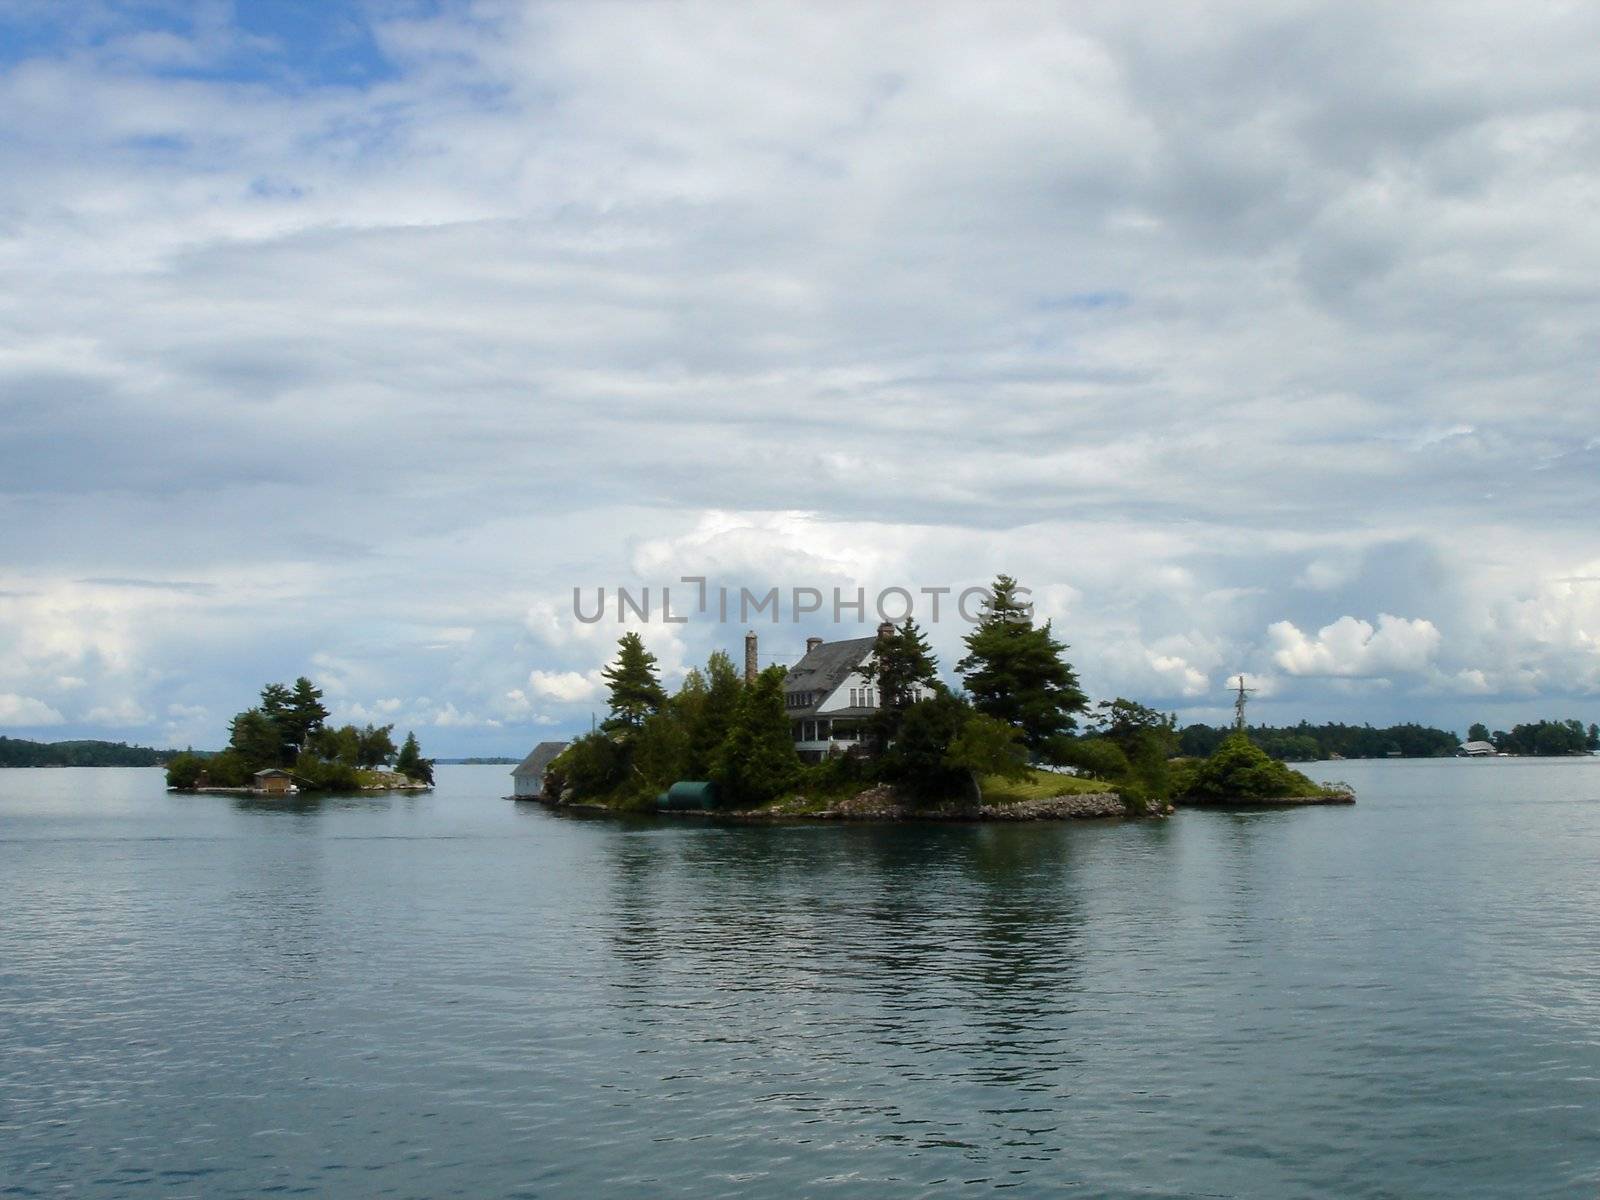 Small island with a house in the middle of thousand islands on Ontario lake, Canada, by cloudy weather